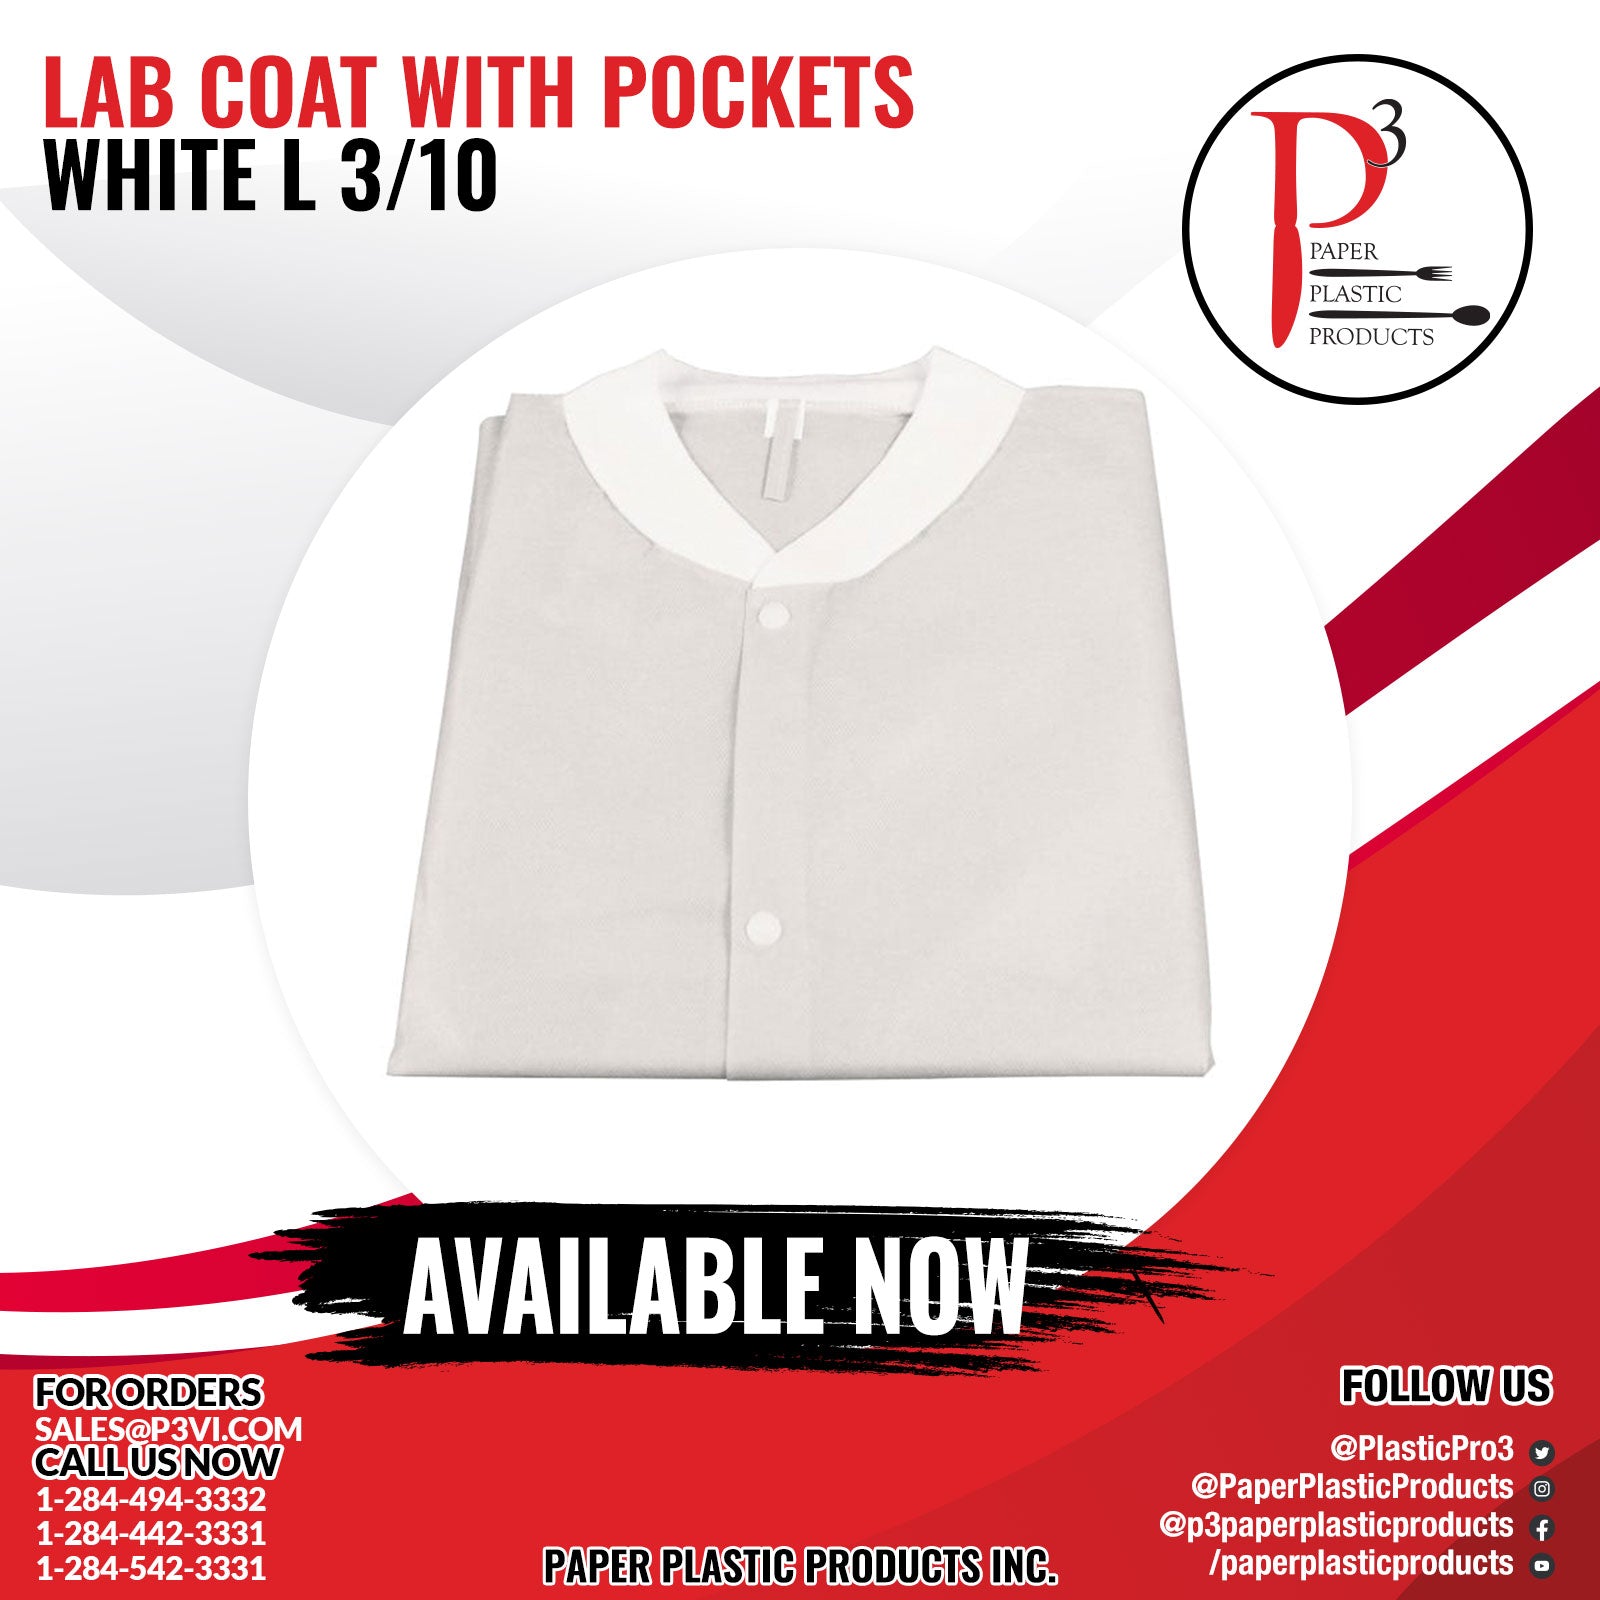 Lab Coat with Pockets White L 1/3/10